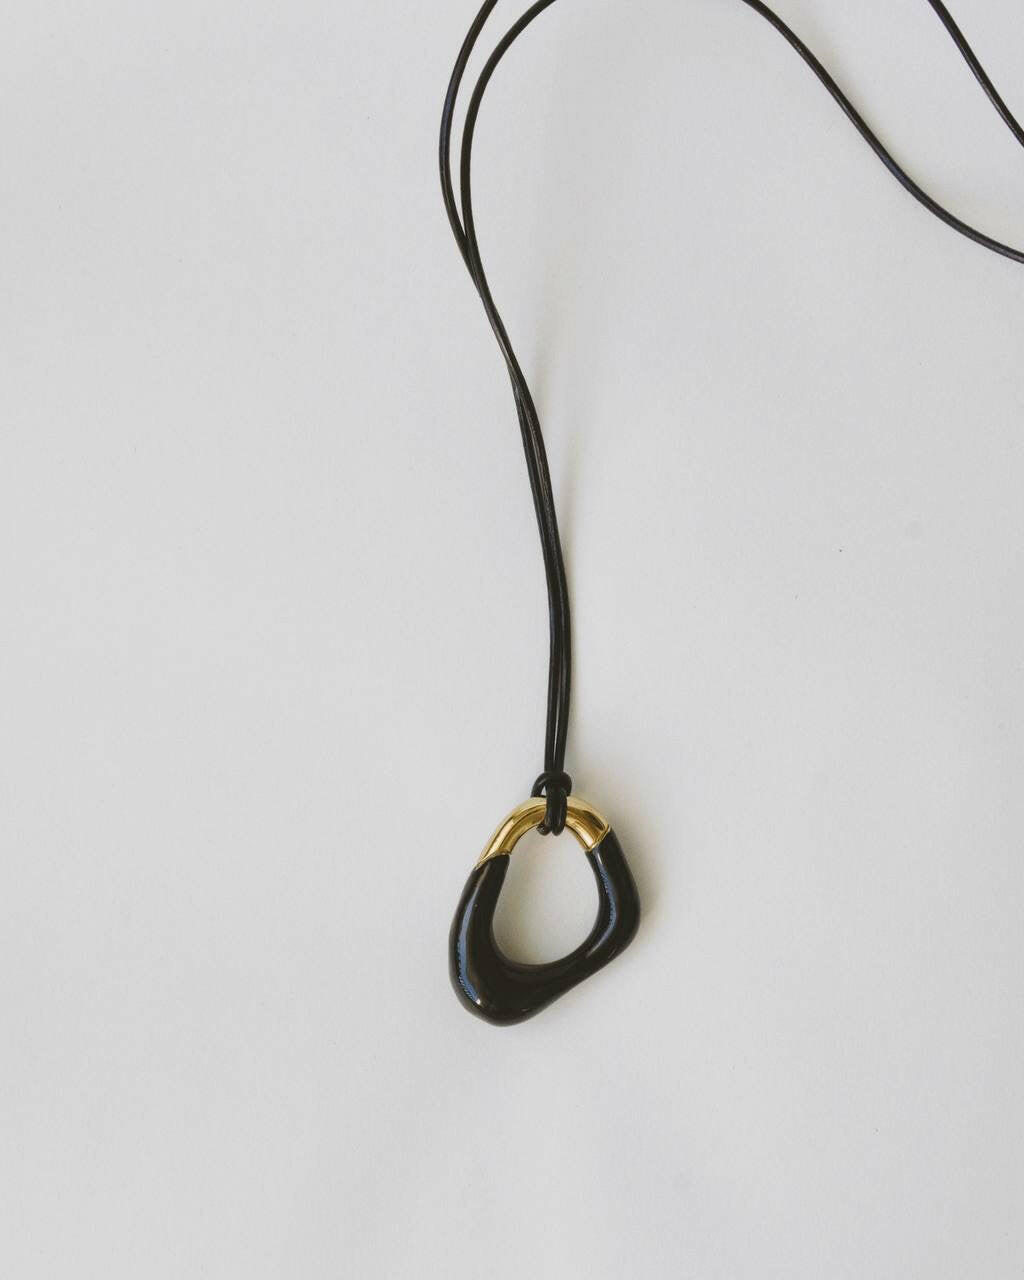 Momentum Necklace in black and gold, hanging on a vegan leather cord. Designed by Ani Han, this piece combines modern elegance with minimalism, featuring enamel coating and 18K gold plating.